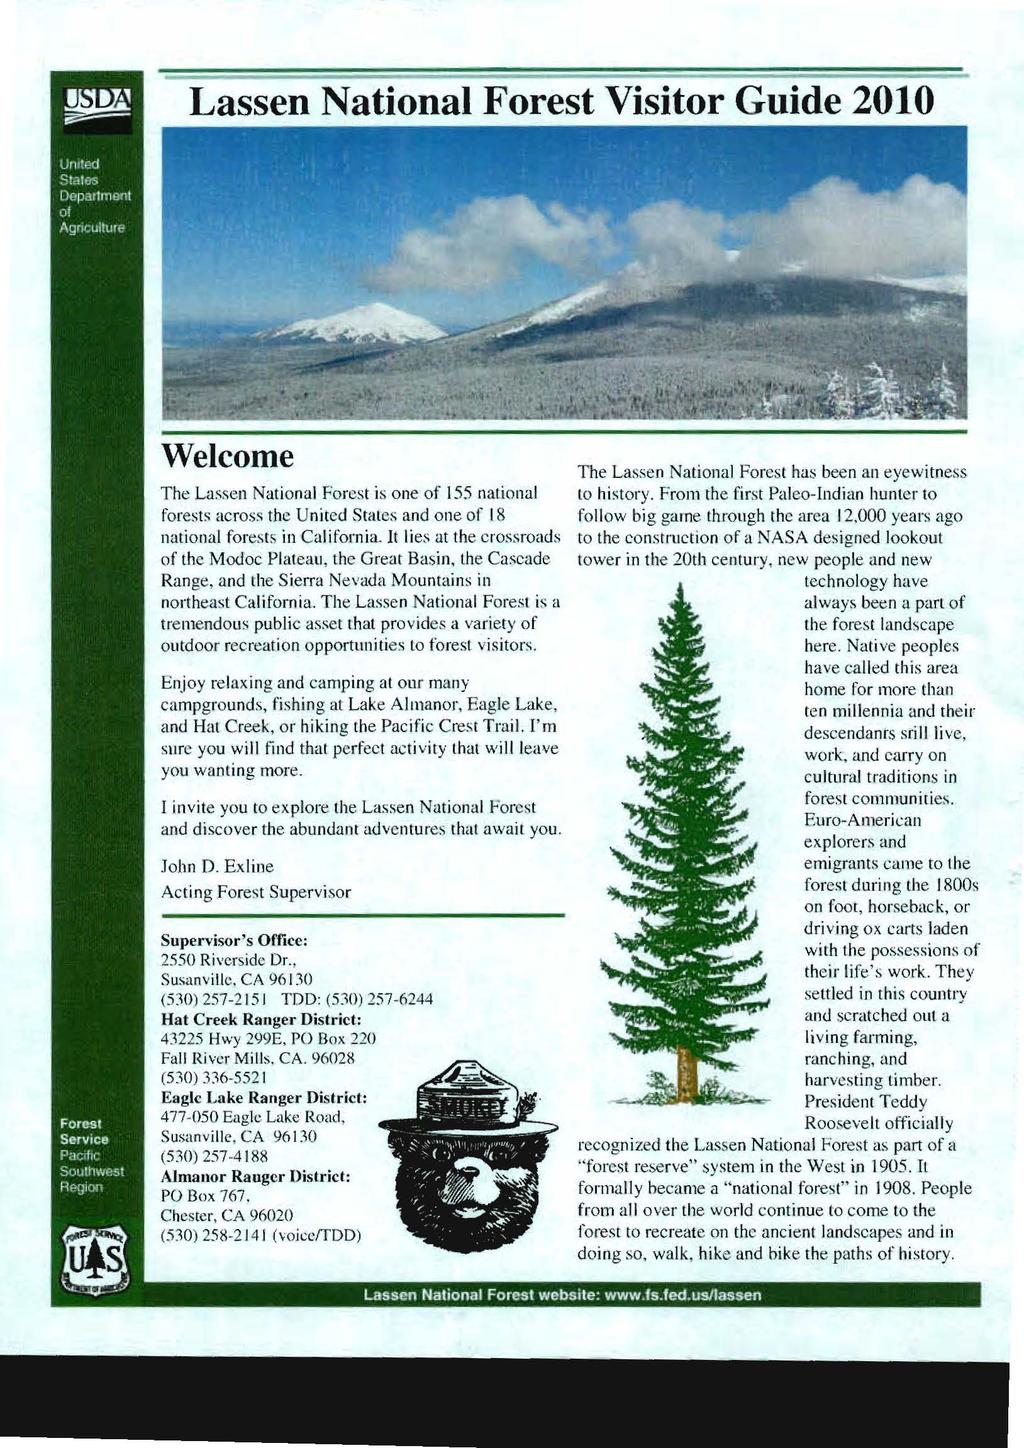 Lassen National Forest Visitor Guide 2010 Welcome The Lassen National Forest is one of 155 national forests across the United States and one or 18 national forests in California.